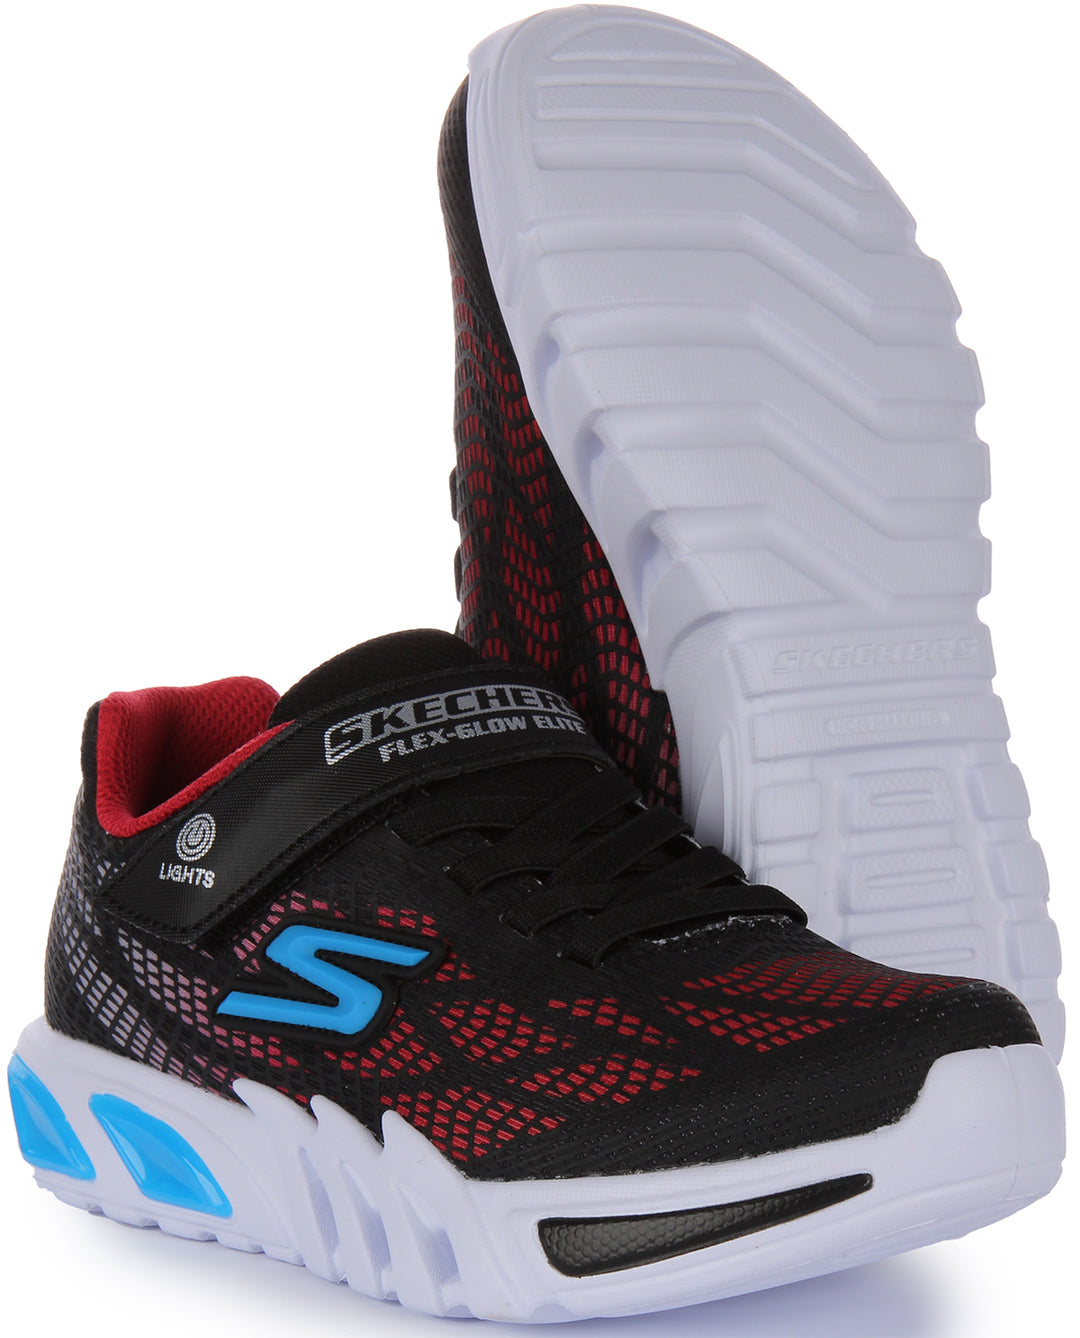 Skechers Flex Glow Red Elite 4feetshoes In Up Kids – Trainers For Light Black 